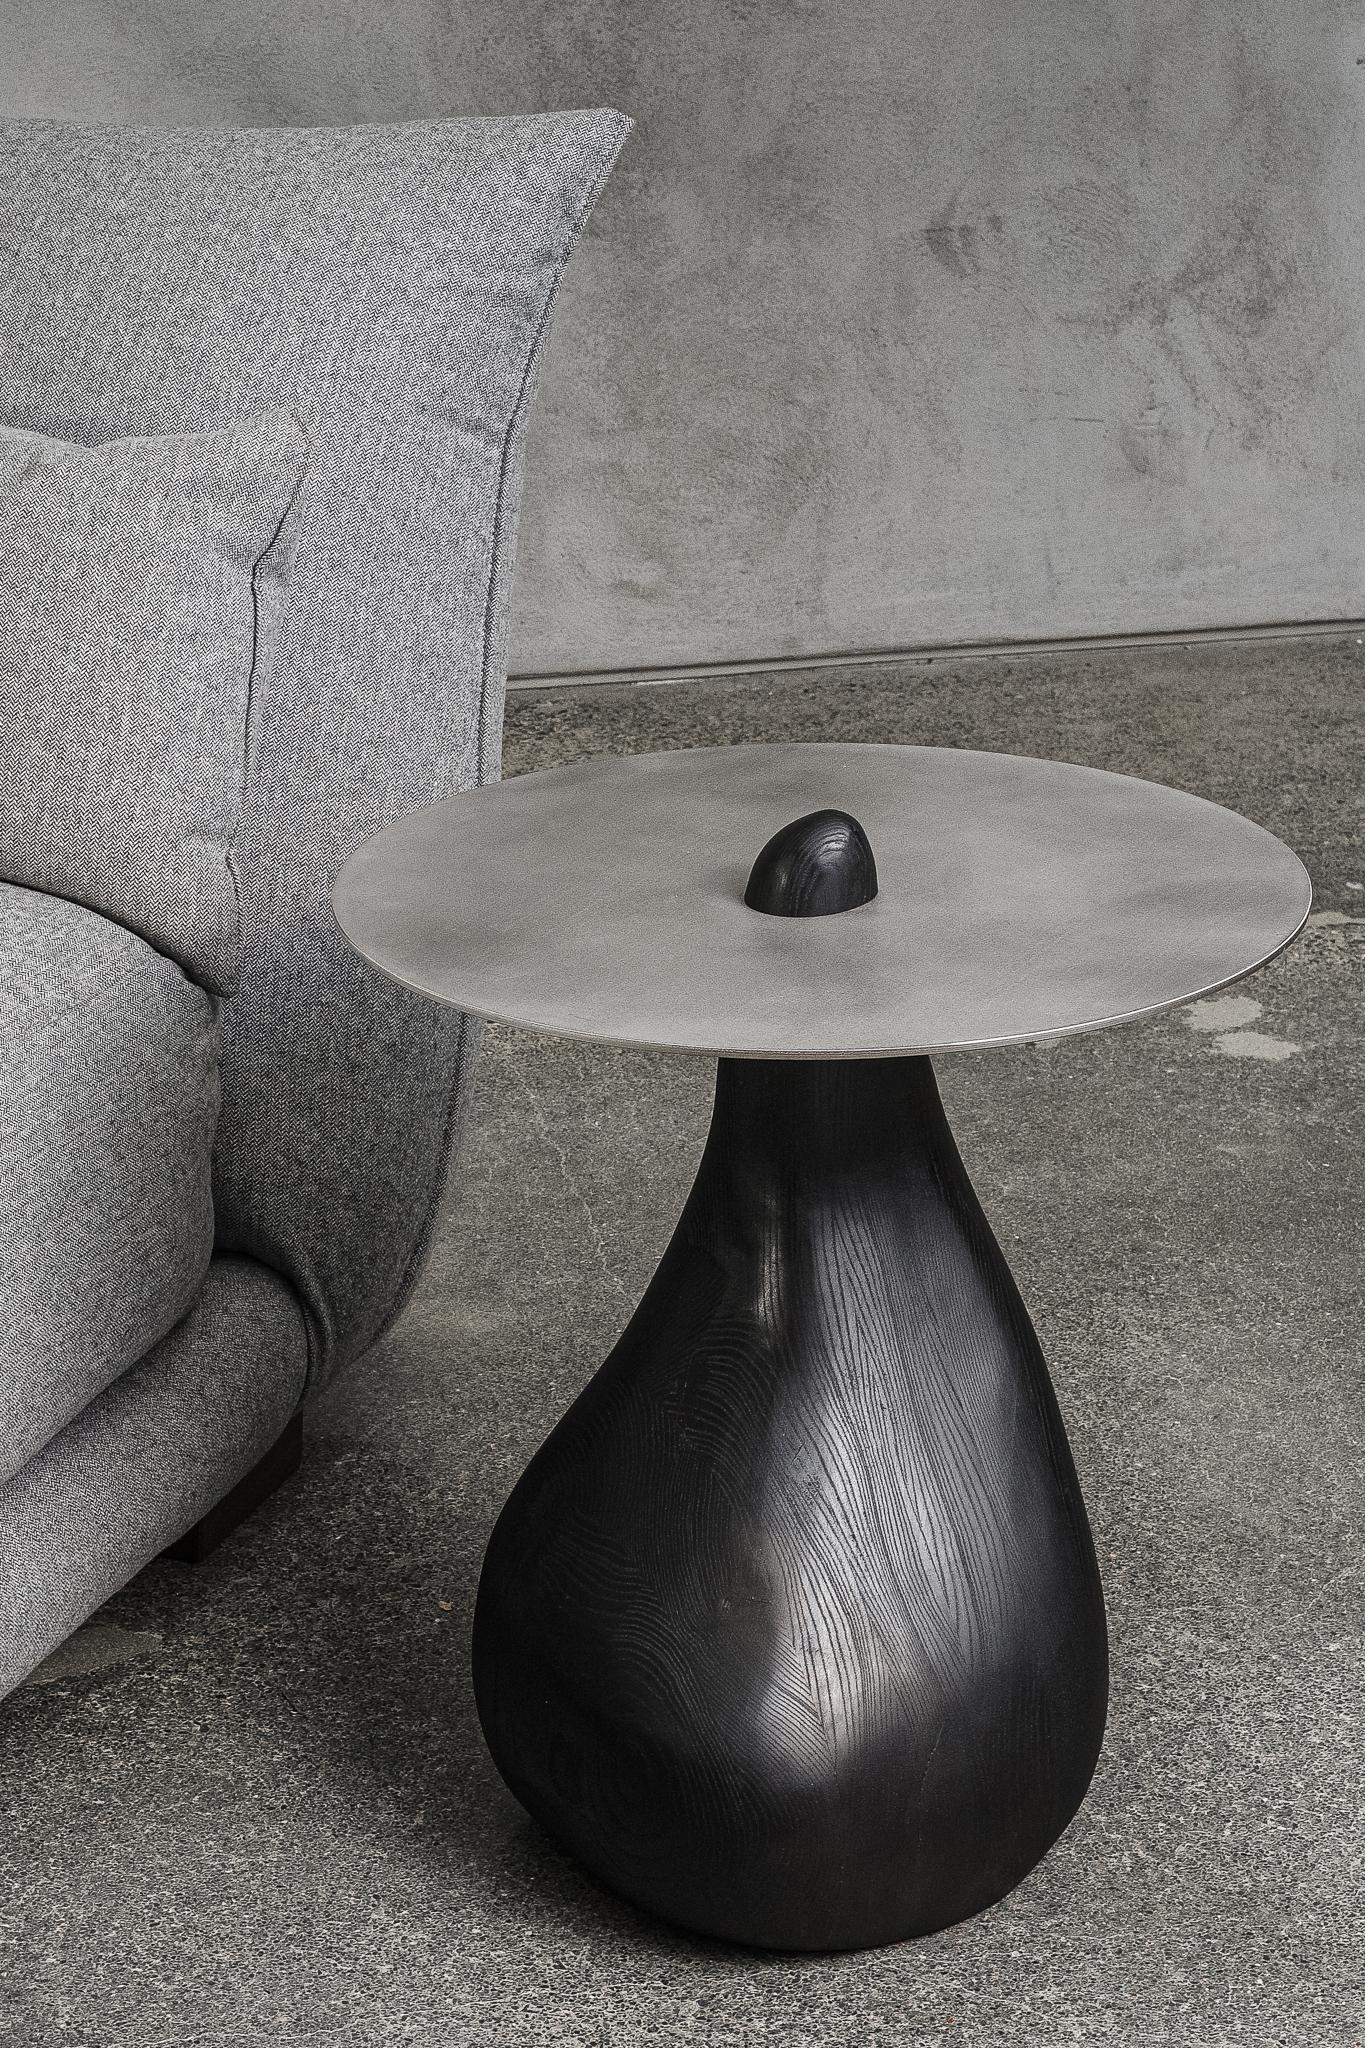 Organic Modern Crépuscule - Contemporary side table - Carved Ash & steel top by Nadine Hajjar For Sale